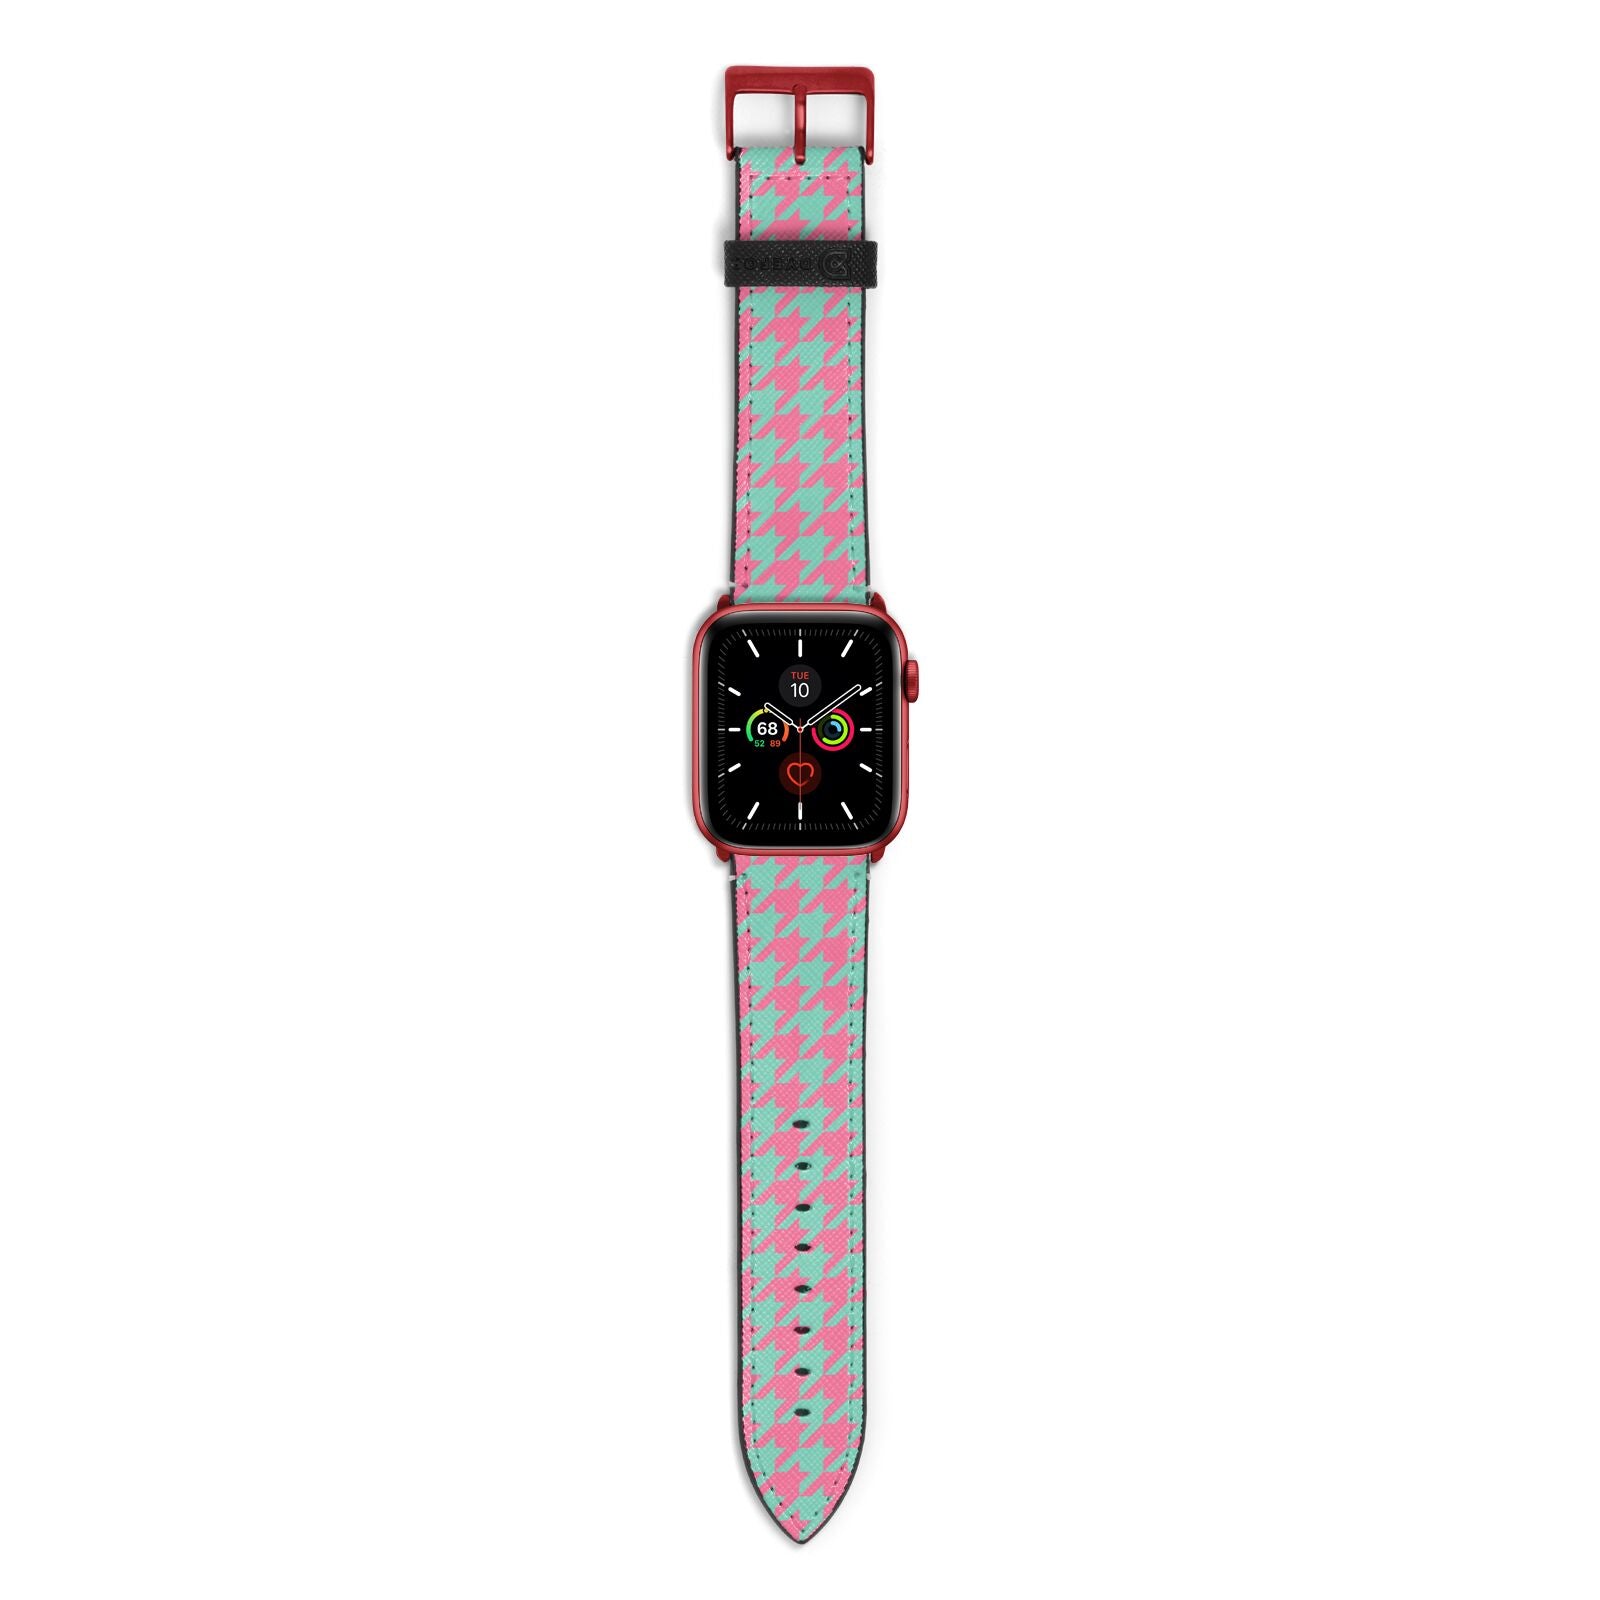 Pink Houndstooth Apple Watch Strap with Red Hardware